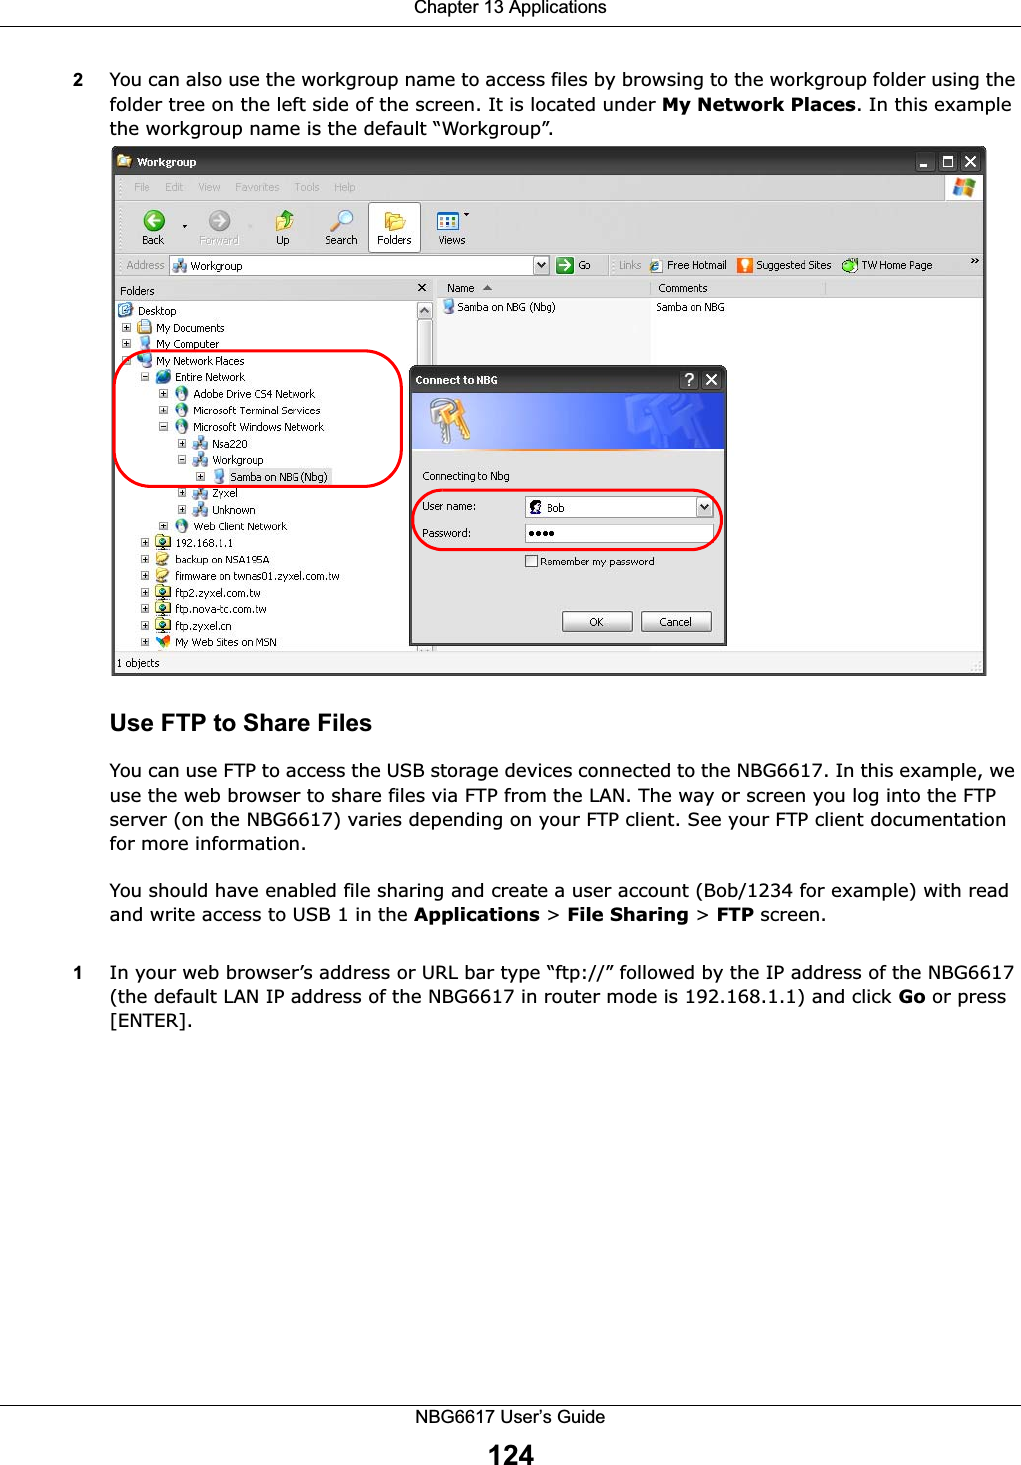 Chapter 13 ApplicationsNBG6617 User’s Guide1242You can also use the workgroup name to access files by browsing to the workgroup folder using the folder tree on the left side of the screen. It is located under My Network Places. In this example the workgroup name is the default “Workgroup”. Use FTP to Share FilesYou can use FTP to access the USB storage devices connected to the NBG6617. In this example, we use the web browser to share files via FTP from the LAN. The way or screen you log into the FTP server (on the NBG6617) varies depending on your FTP client. See your FTP client documentation for more information. You should have enabled file sharing and create a user account (Bob/1234 for example) with read and write access to USB 1 in the Applications &gt; File Sharing &gt; FTP screen.1In your web browser’s address or URL bar type “ftp://” followed by the IP address of the NBG6617 (the default LAN IP address of the NBG6617 in router mode is 192.168.1.1) and click Go or press [ENTER].